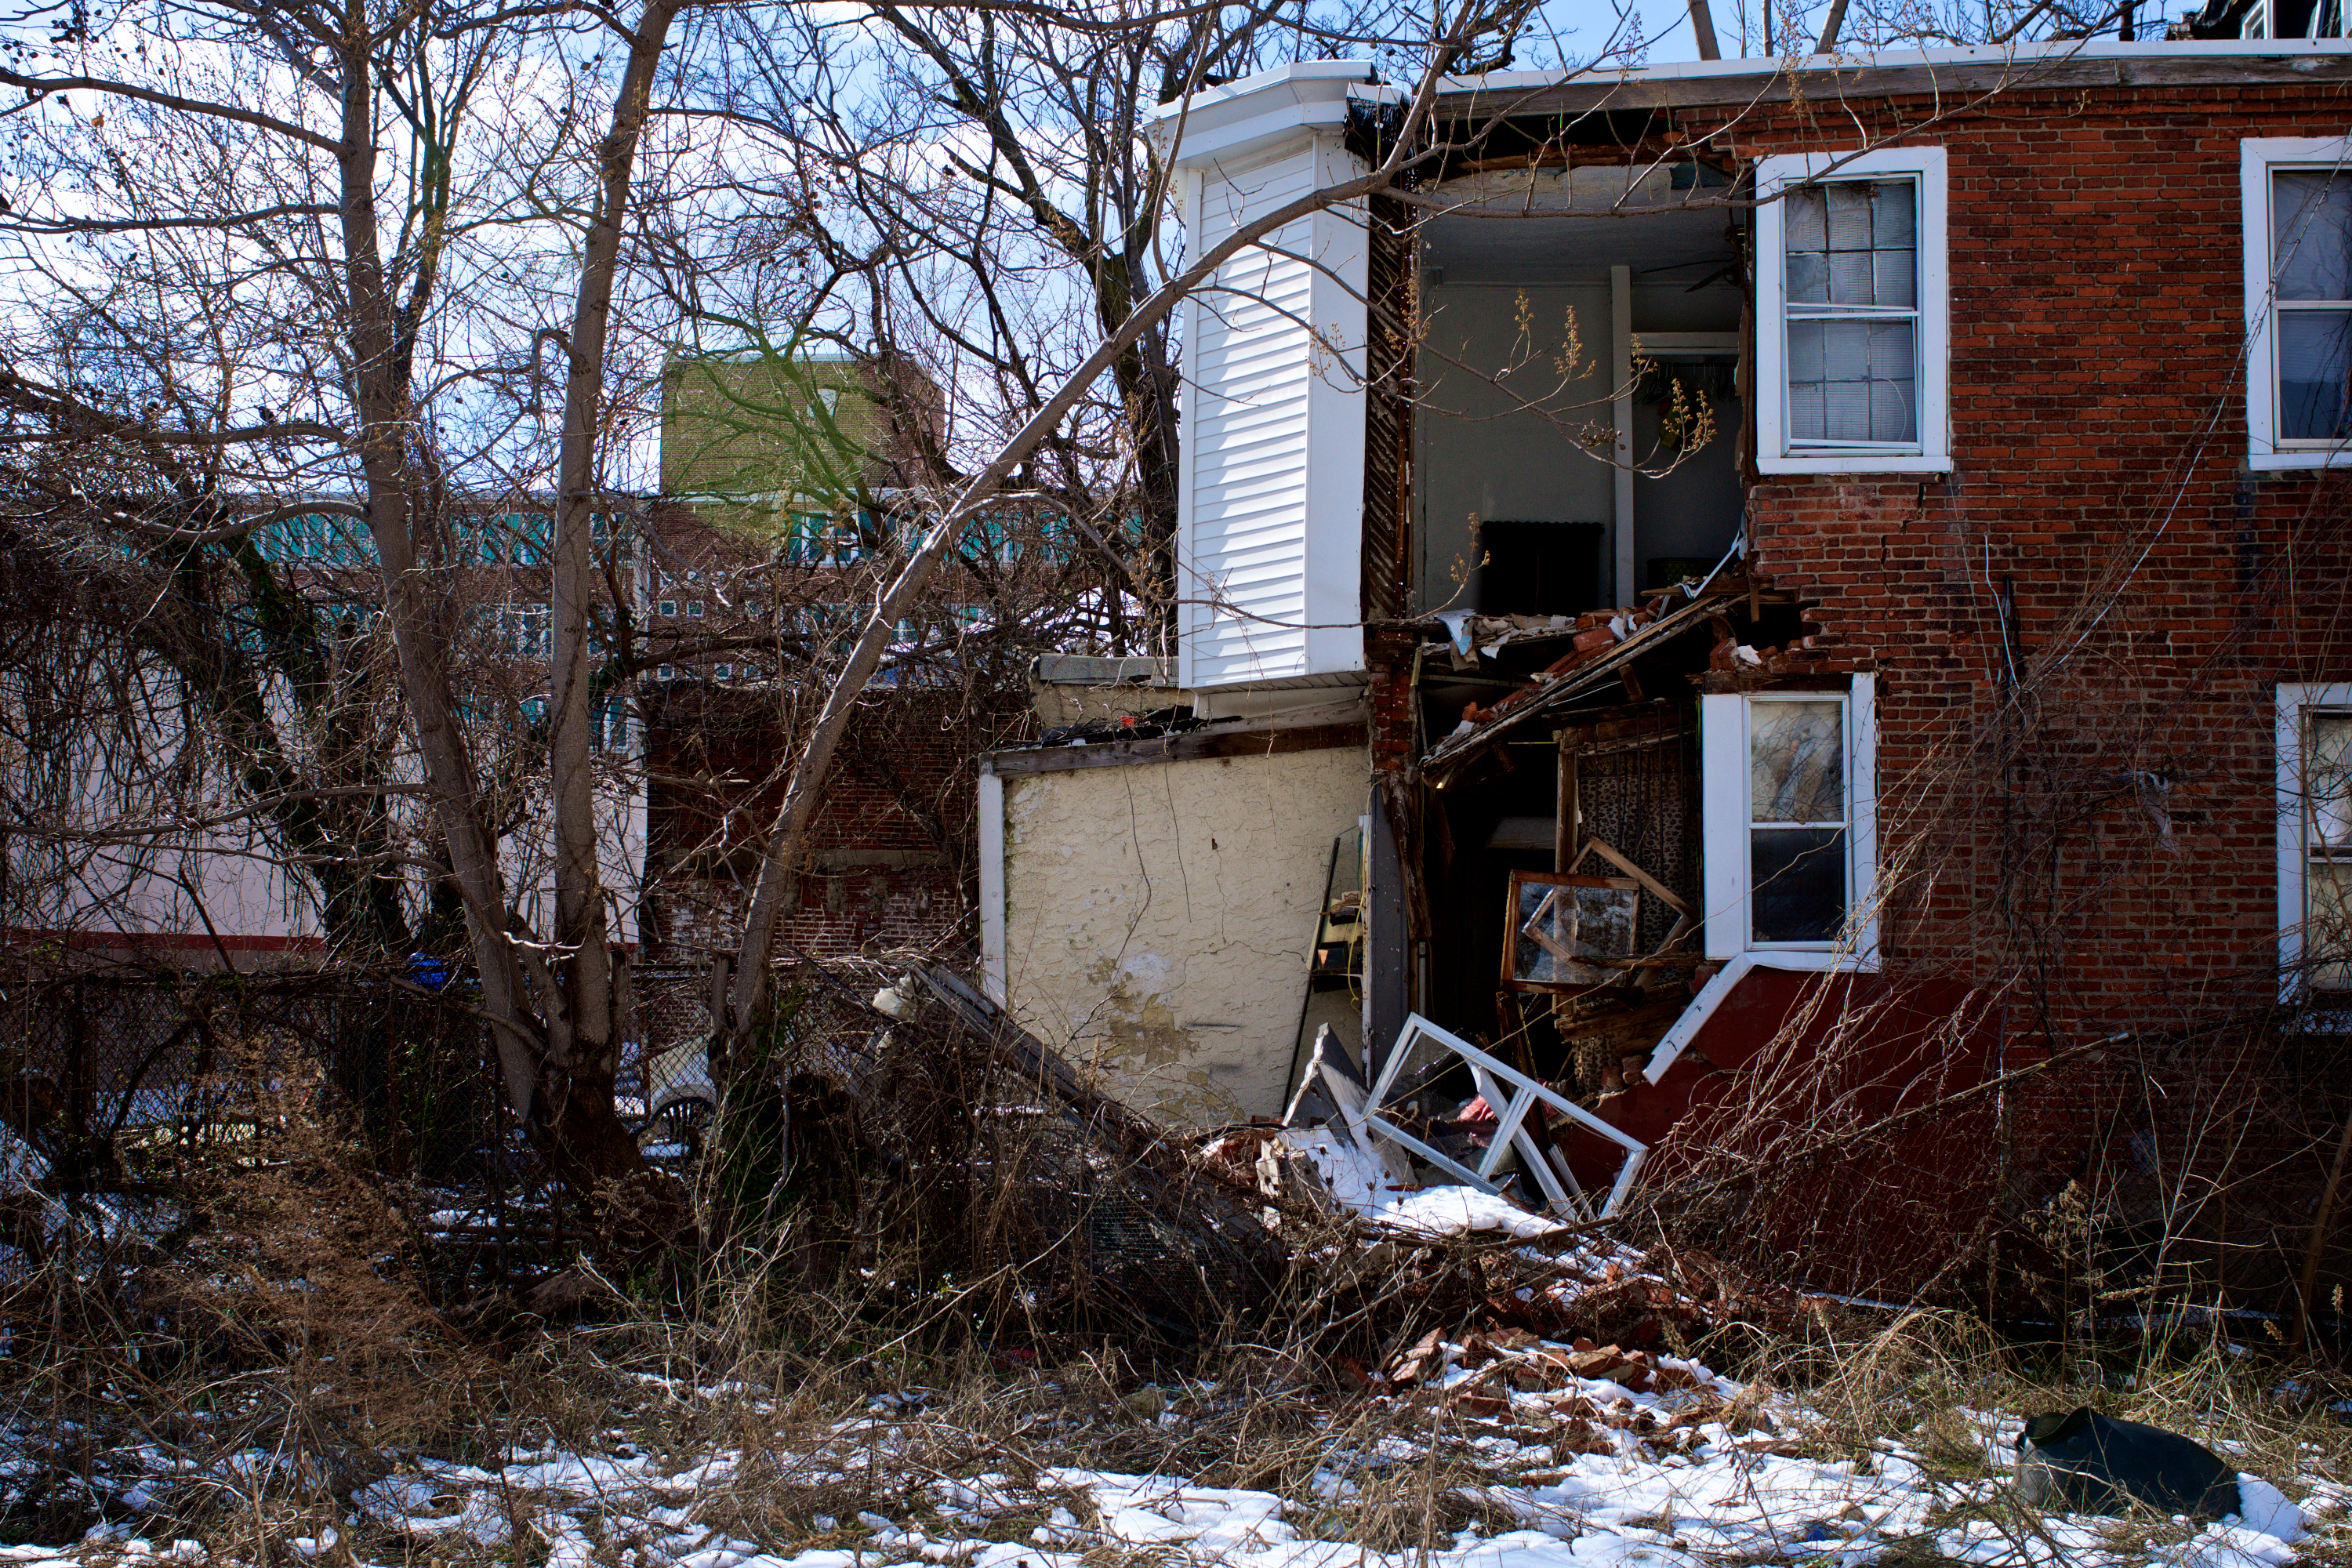 A blighted Strawberry Mansion home. (Bas Slabbers/WHYY)